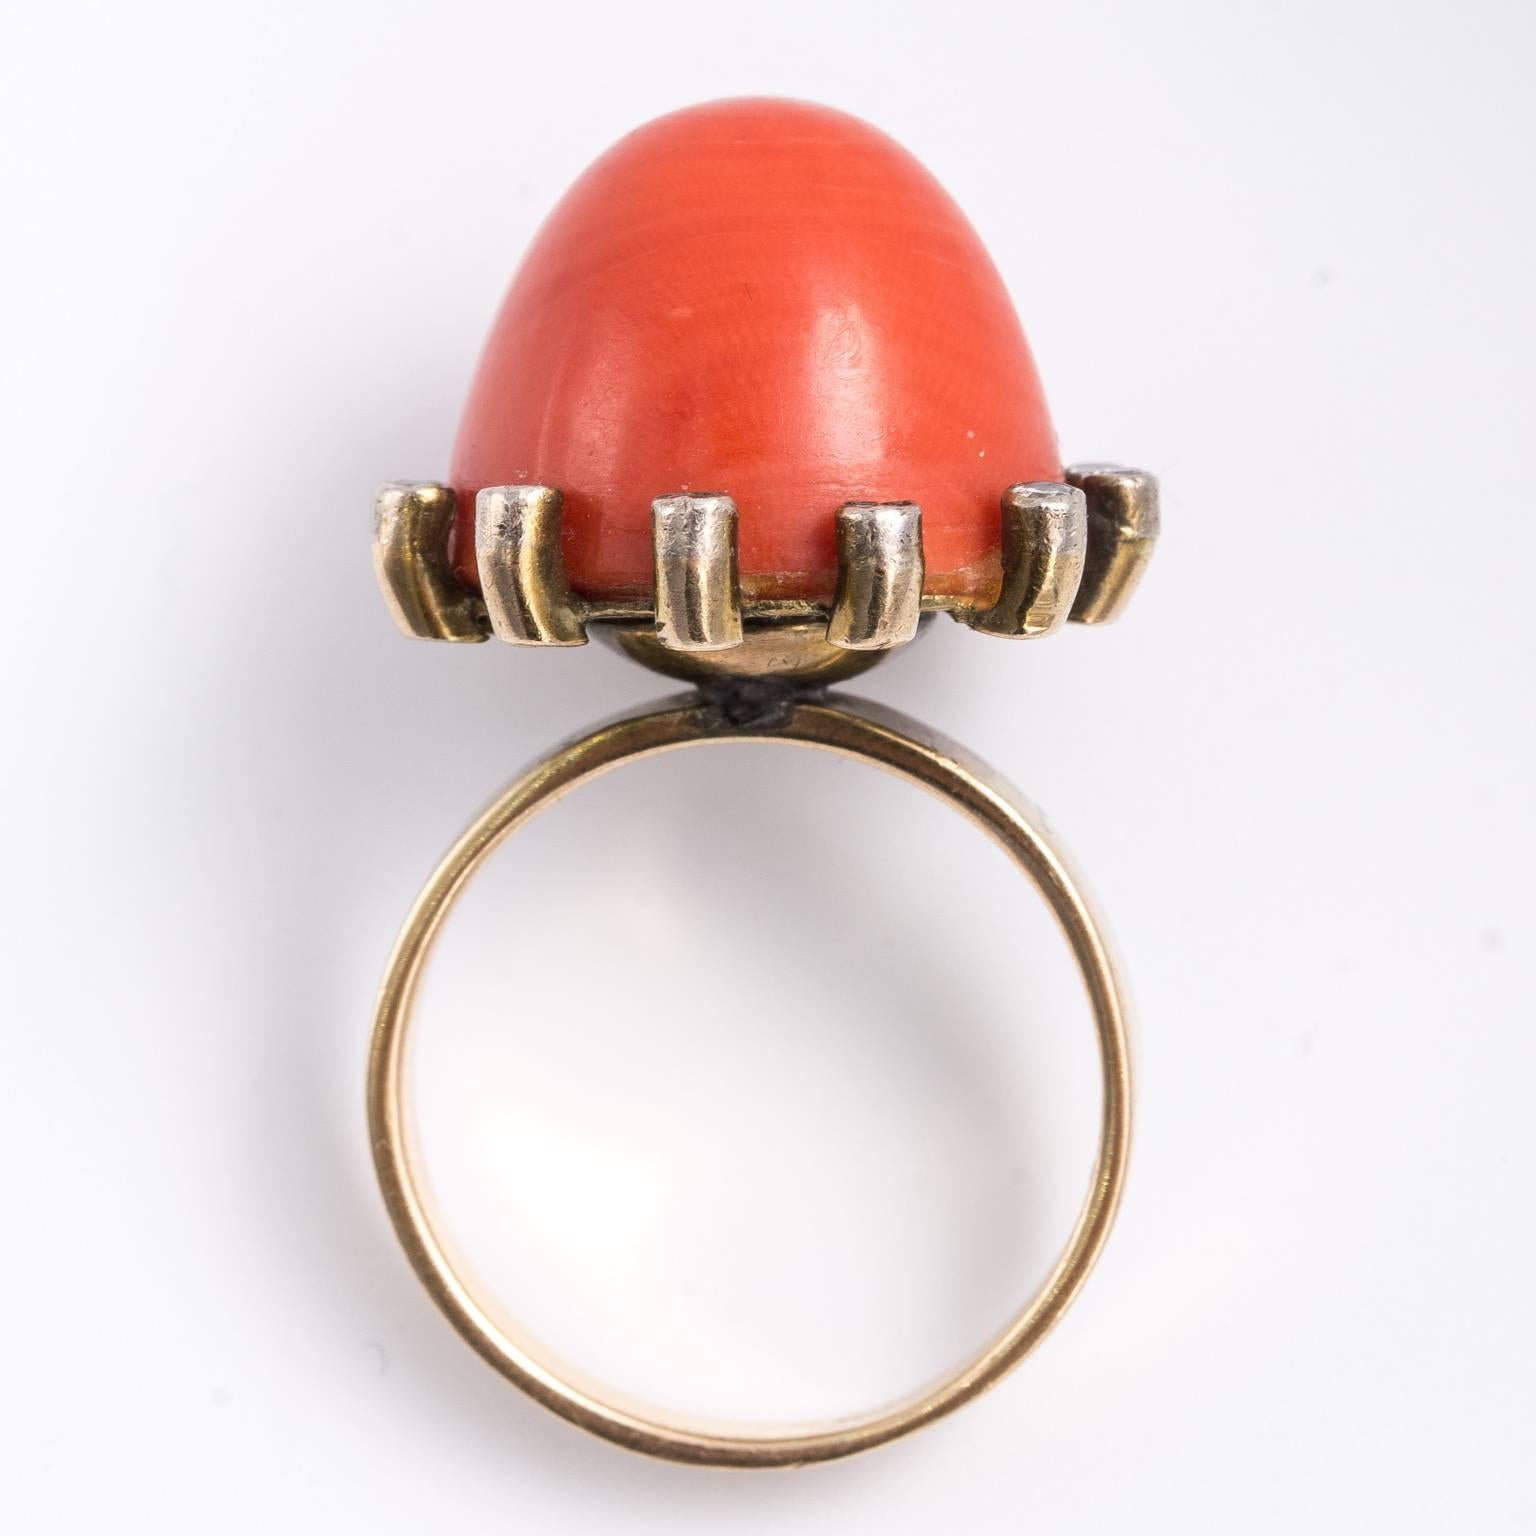 Elegant Edwardian natural coral and rose diamonds ring. A rare dome shaped perfect coral sits among sparkling diamonds in 18kt gold bezels. Unusual and flawless. Weighs 10.80 grams.